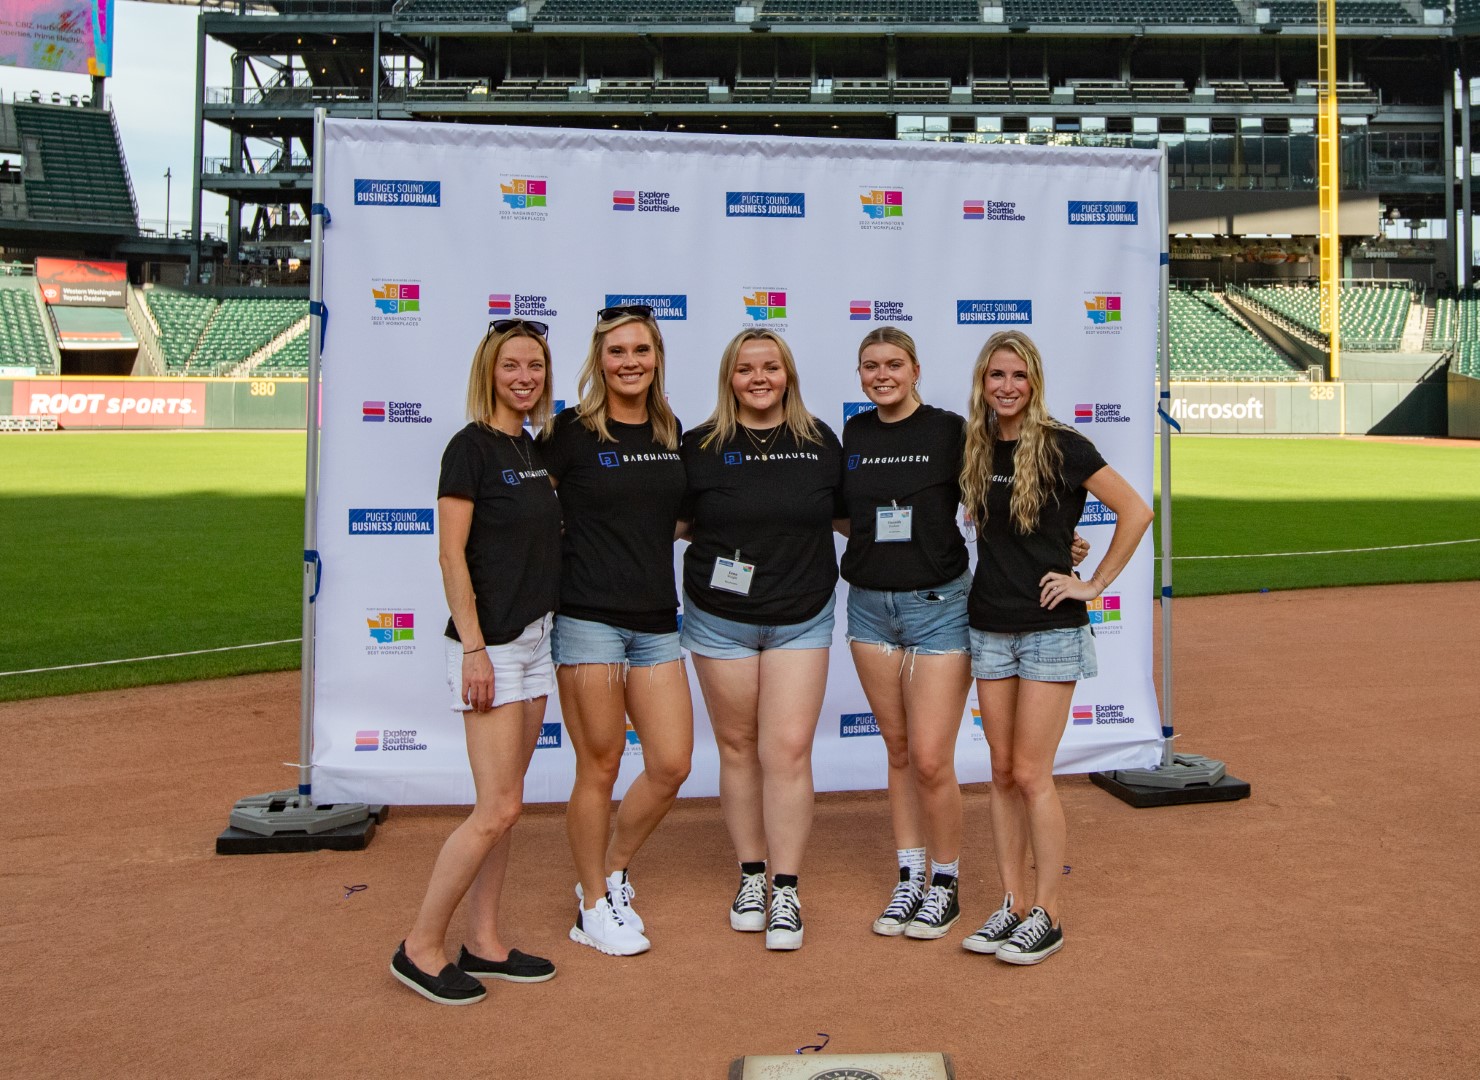 Group of people standing in front of a backdrop on a baseball field